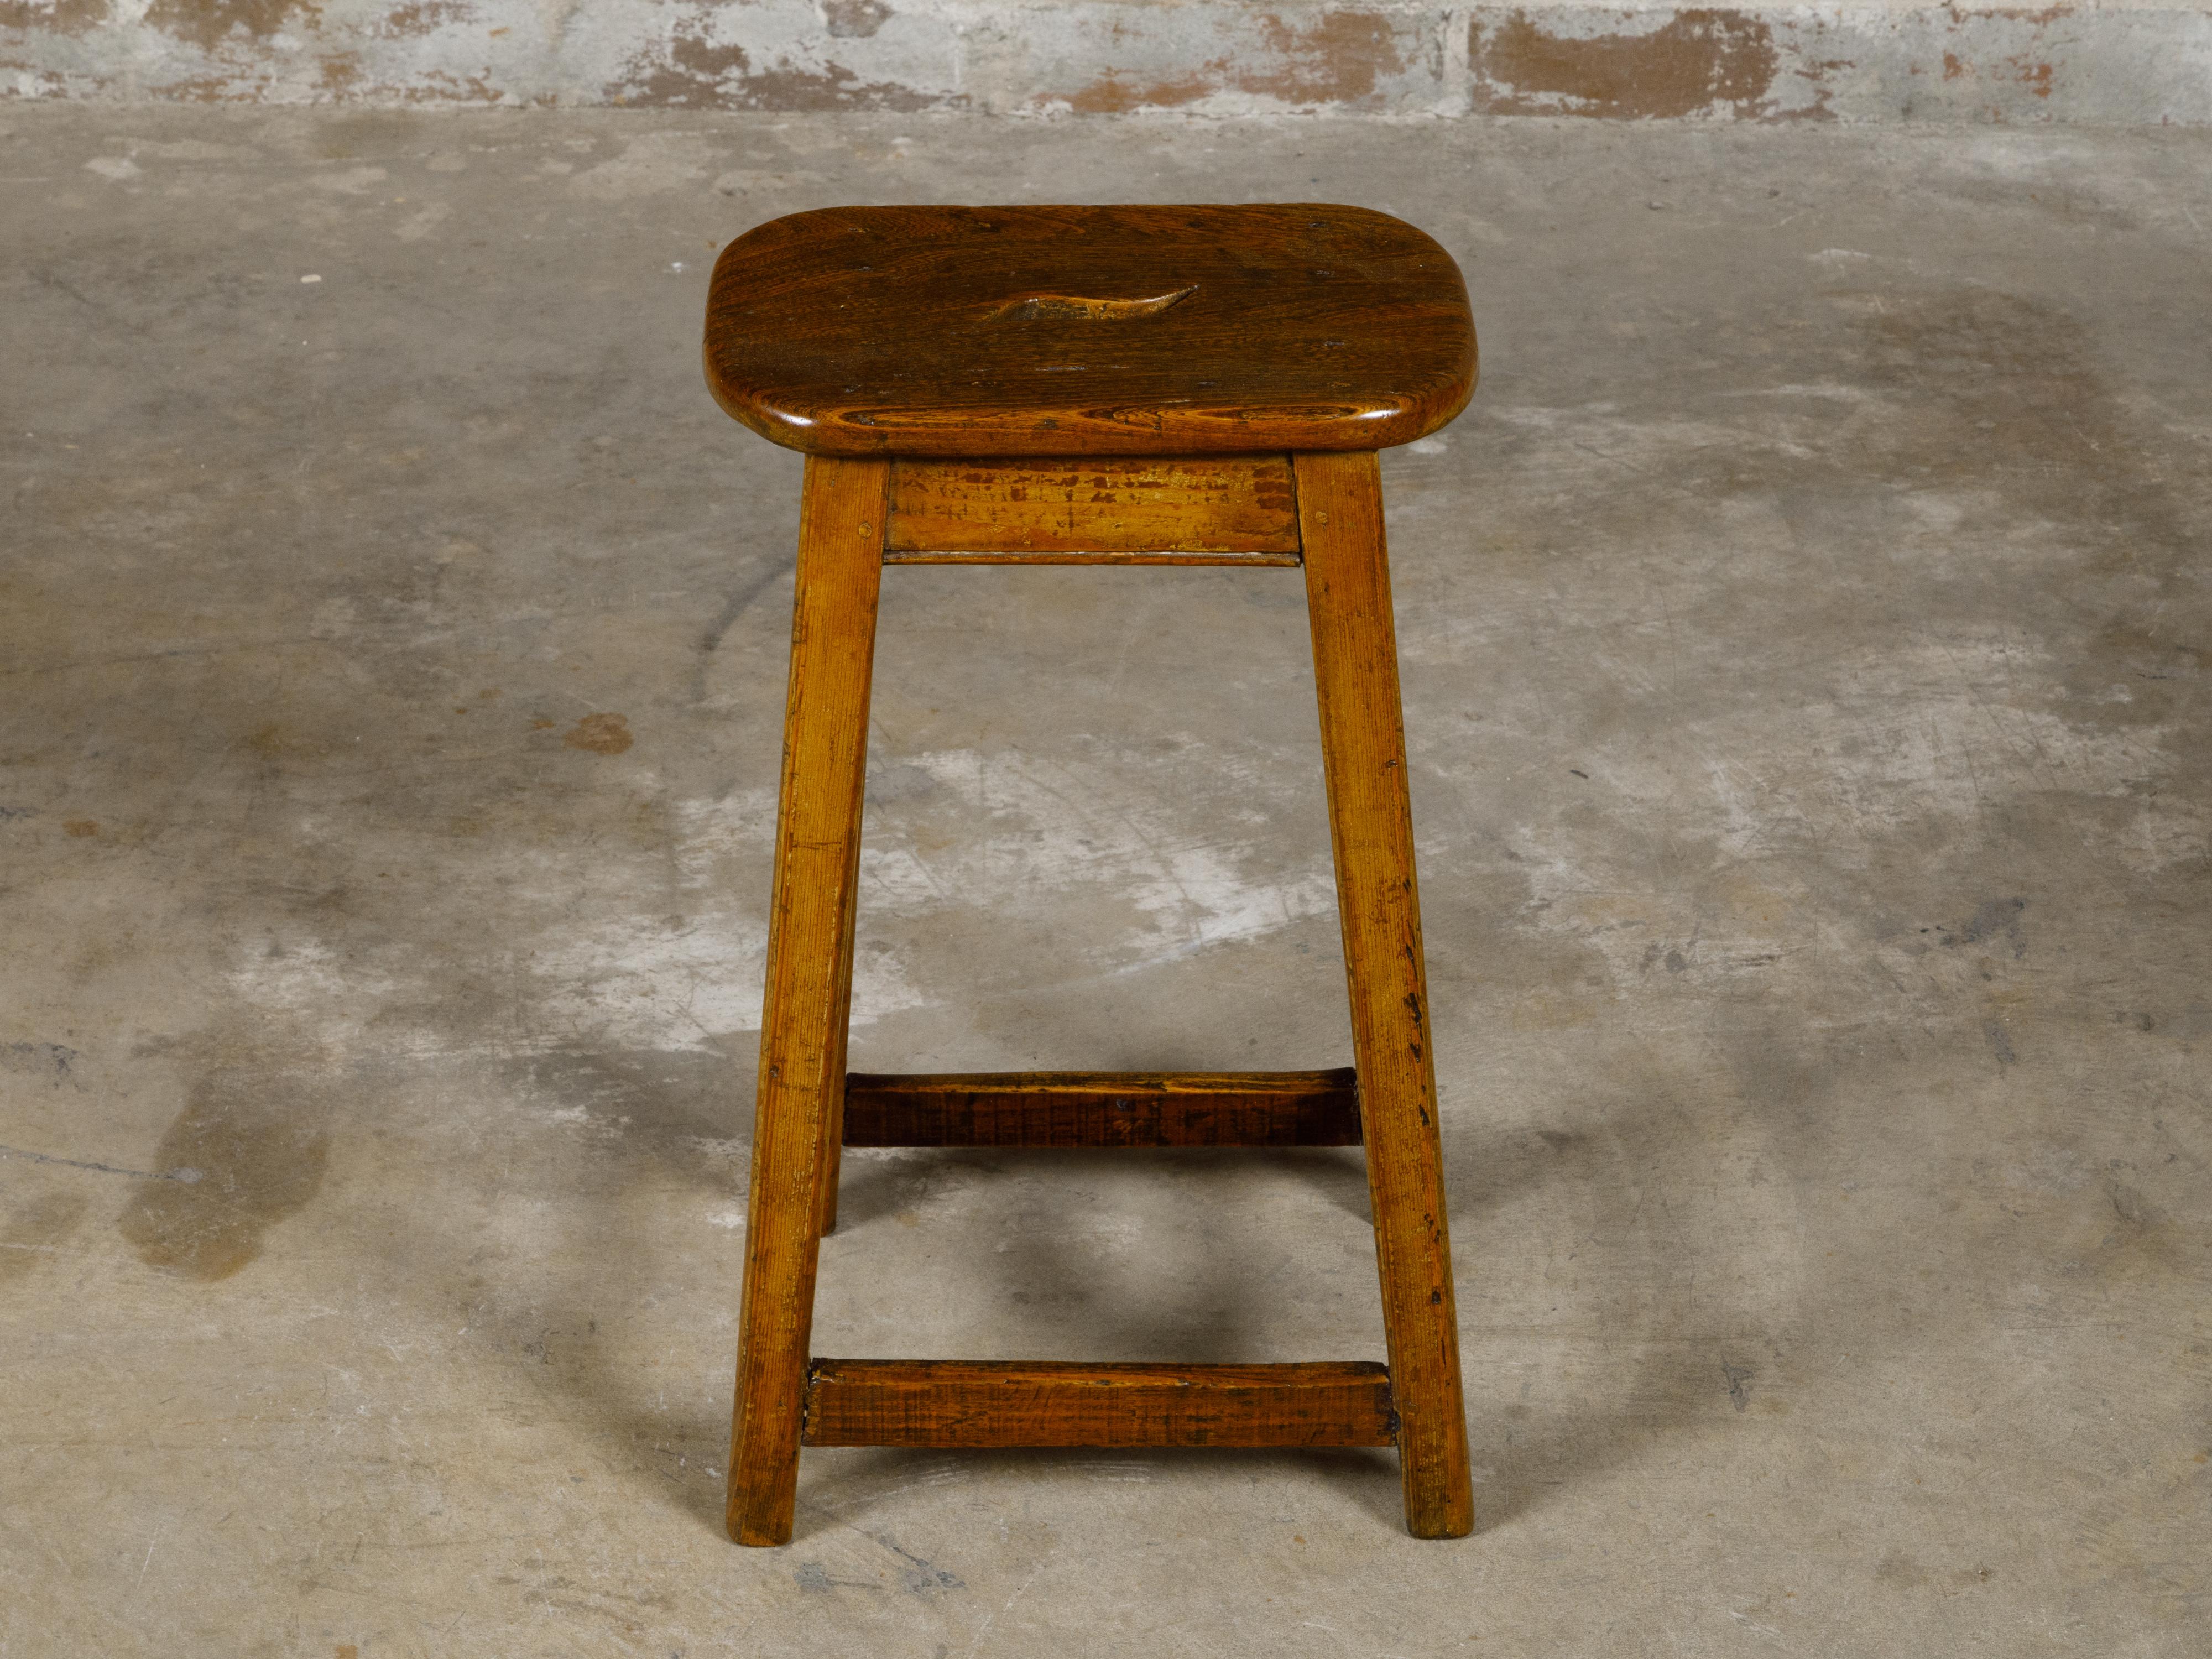 An English 19th century pine stool with side stretchers and rustic character. Discover the rustic charm and practicality of this English 19th-century pine stool, a piece that beautifully showcases the simplicity and robustness of traditional